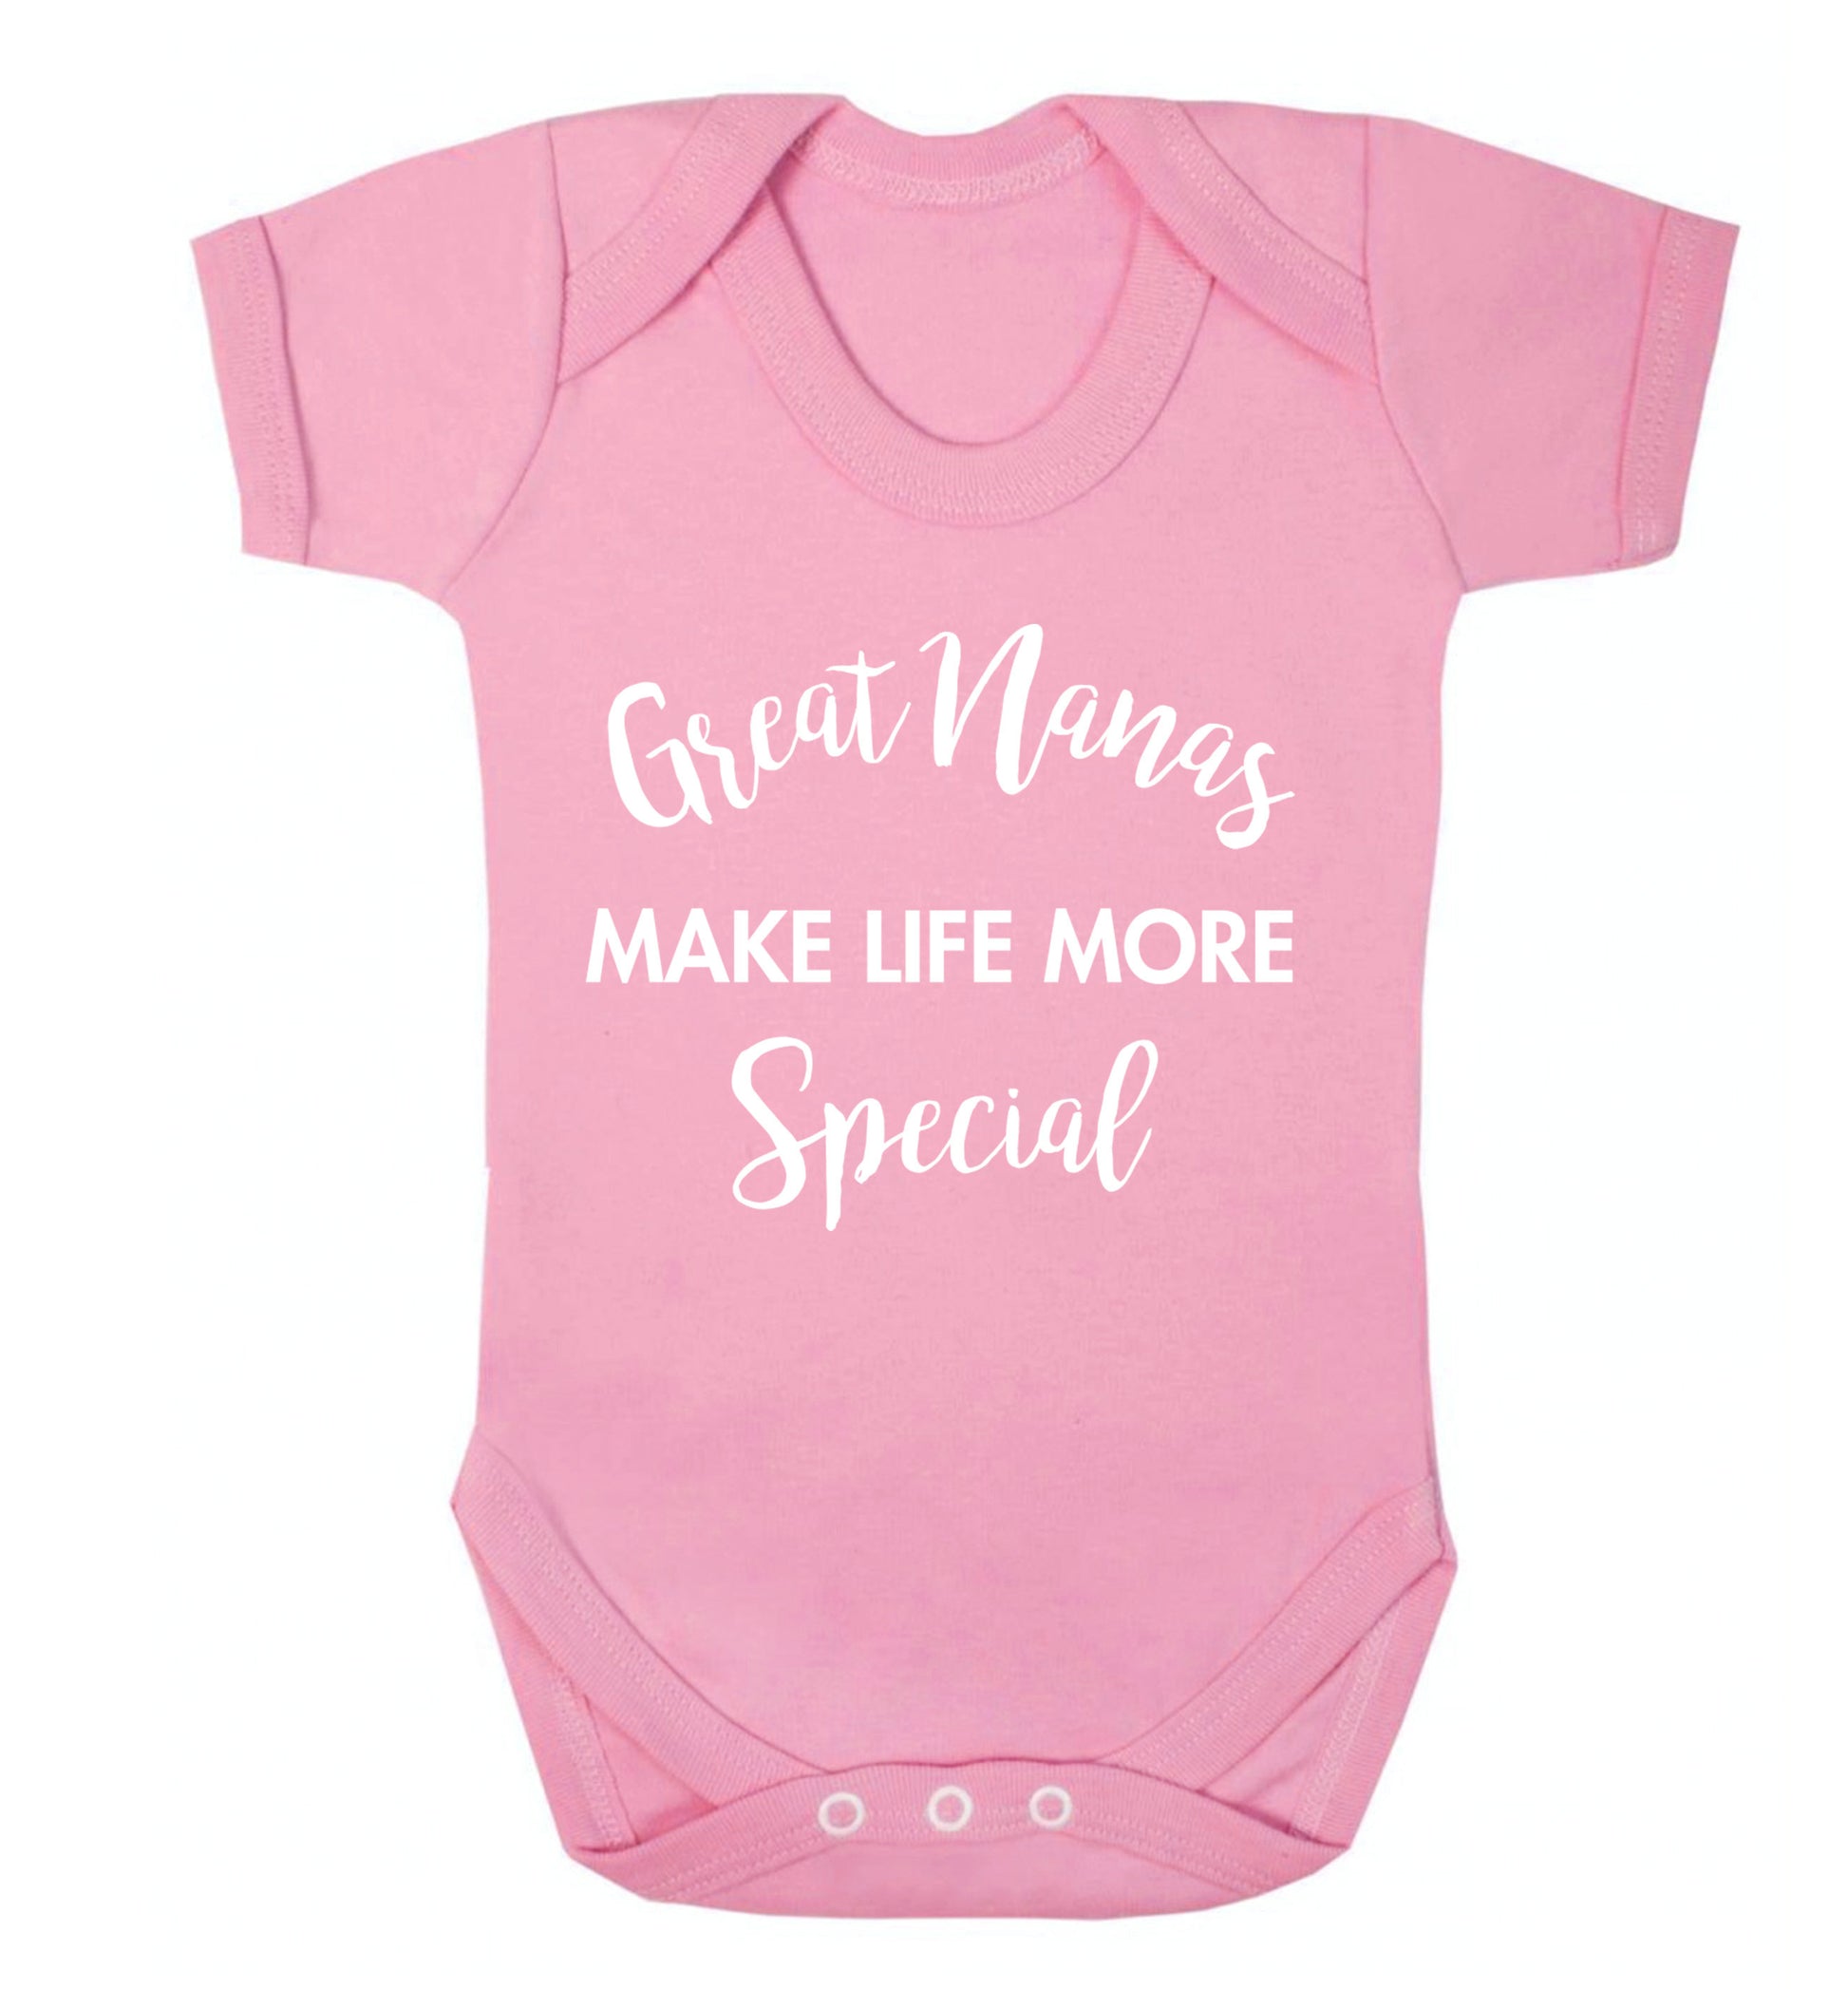 Great nanas make life more special Baby Vest pale pink 18-24 months